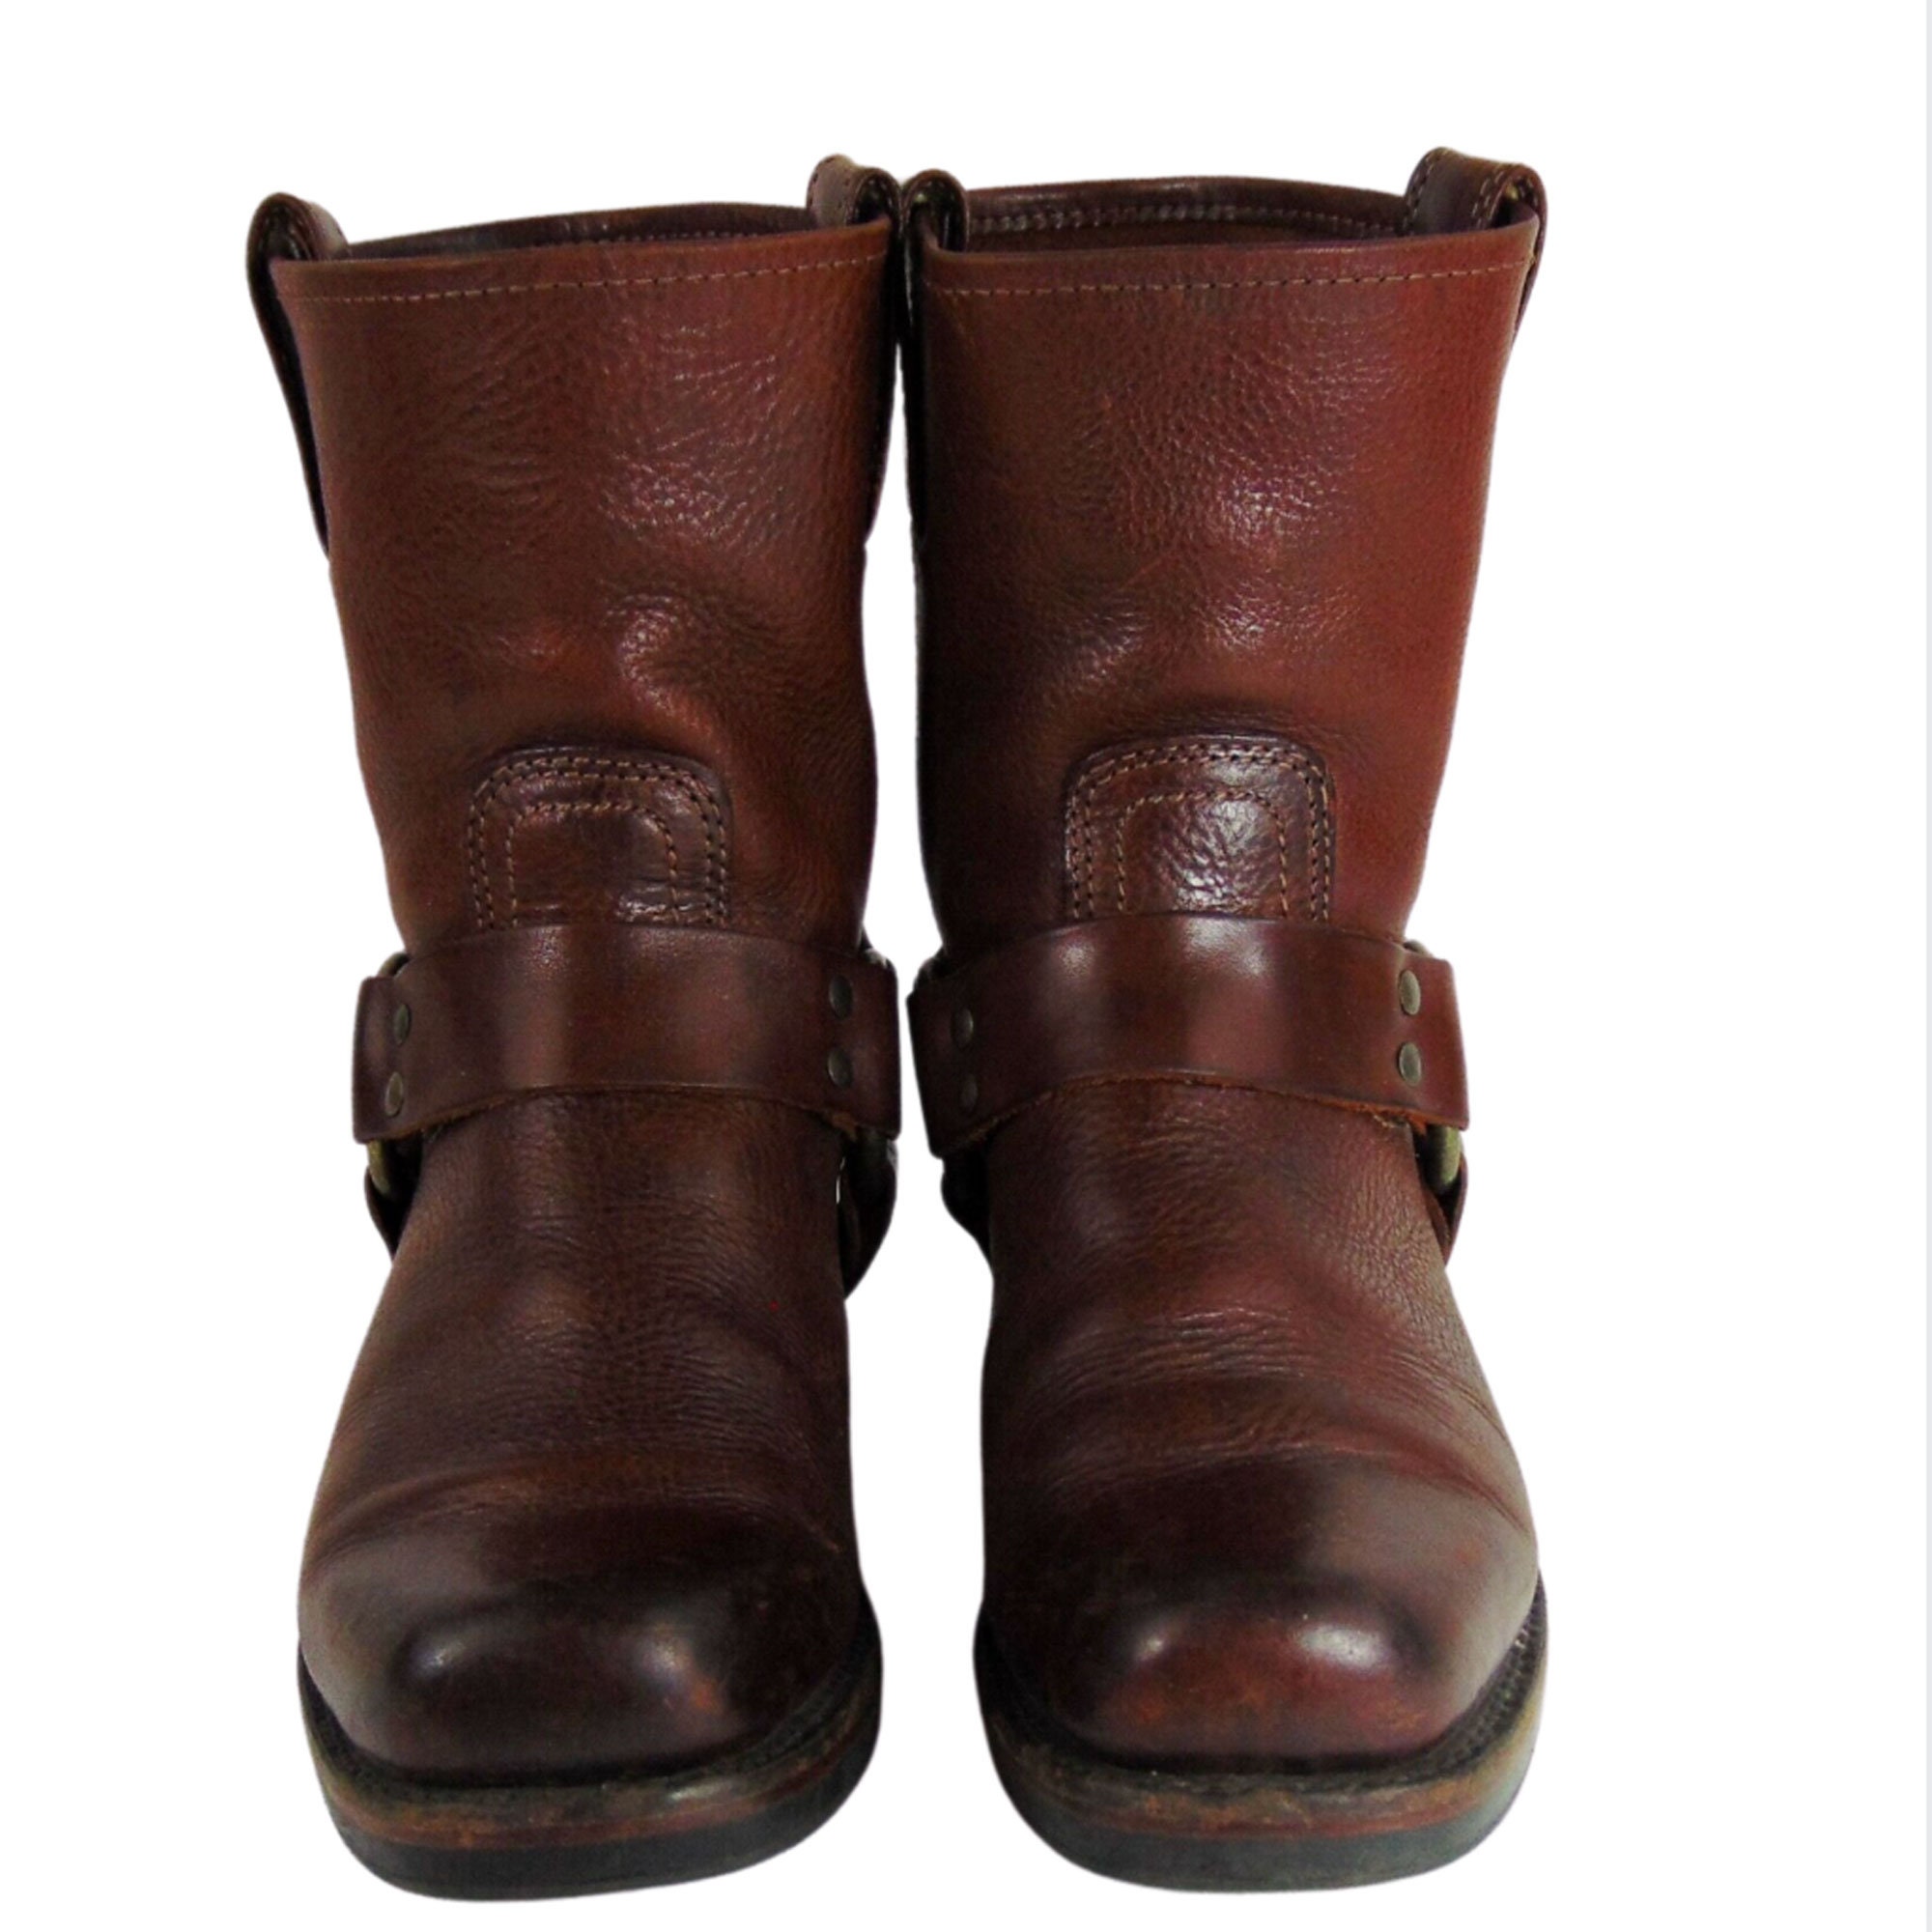 FRYE 87400 Harness Brown Leather Riding Biker Motorcycle Boots - Etsy